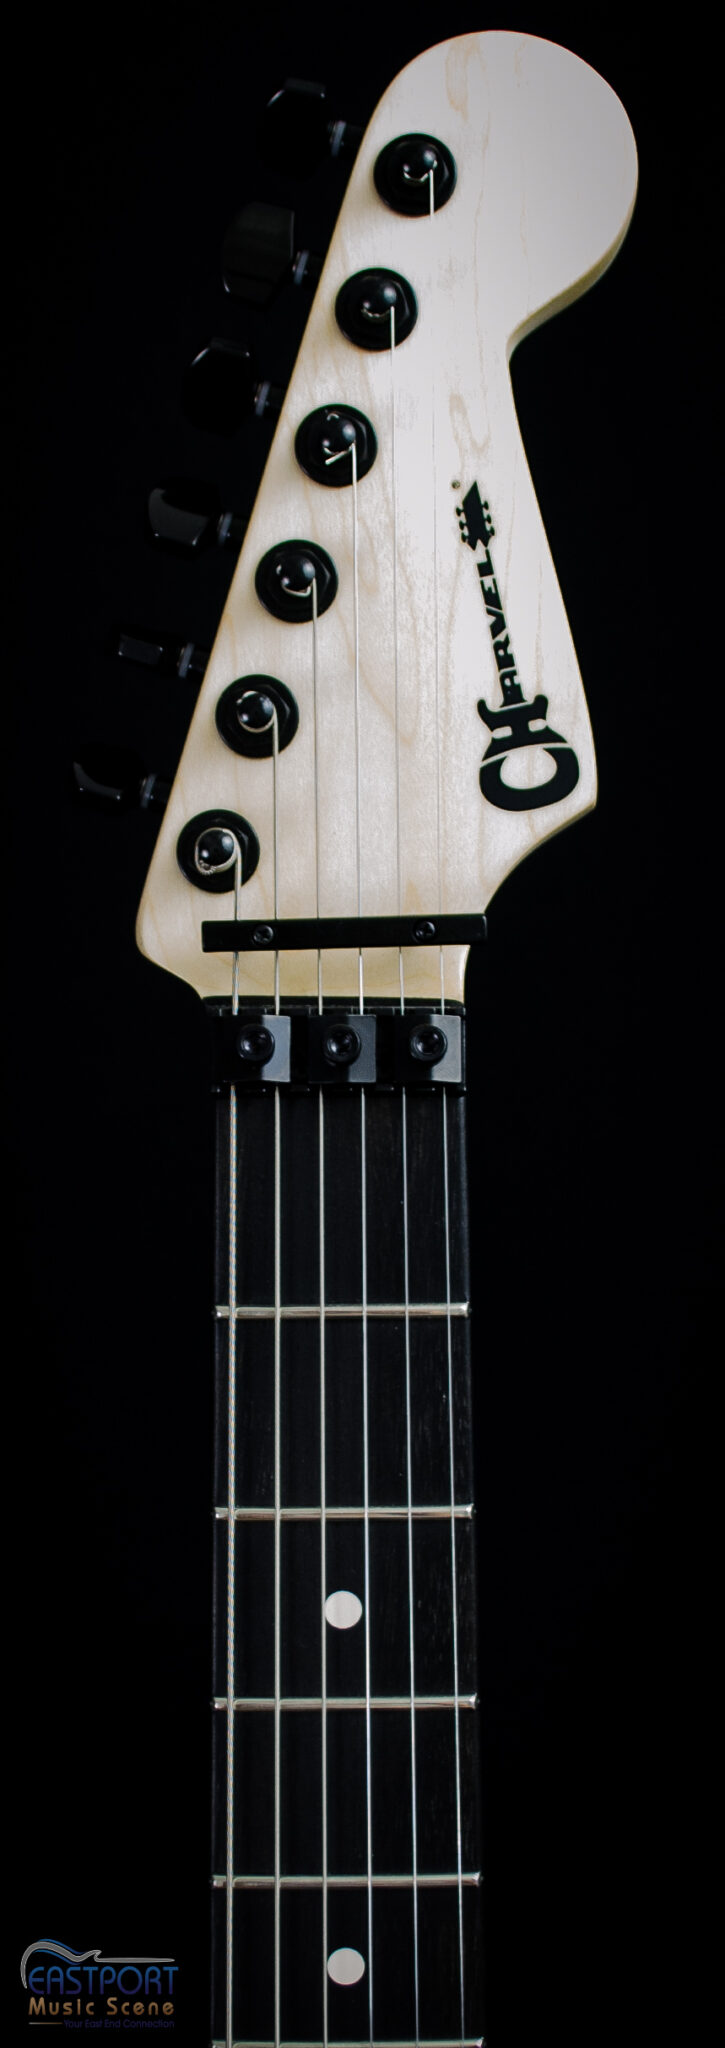 A close up of the neck and strings on an electric guitar.